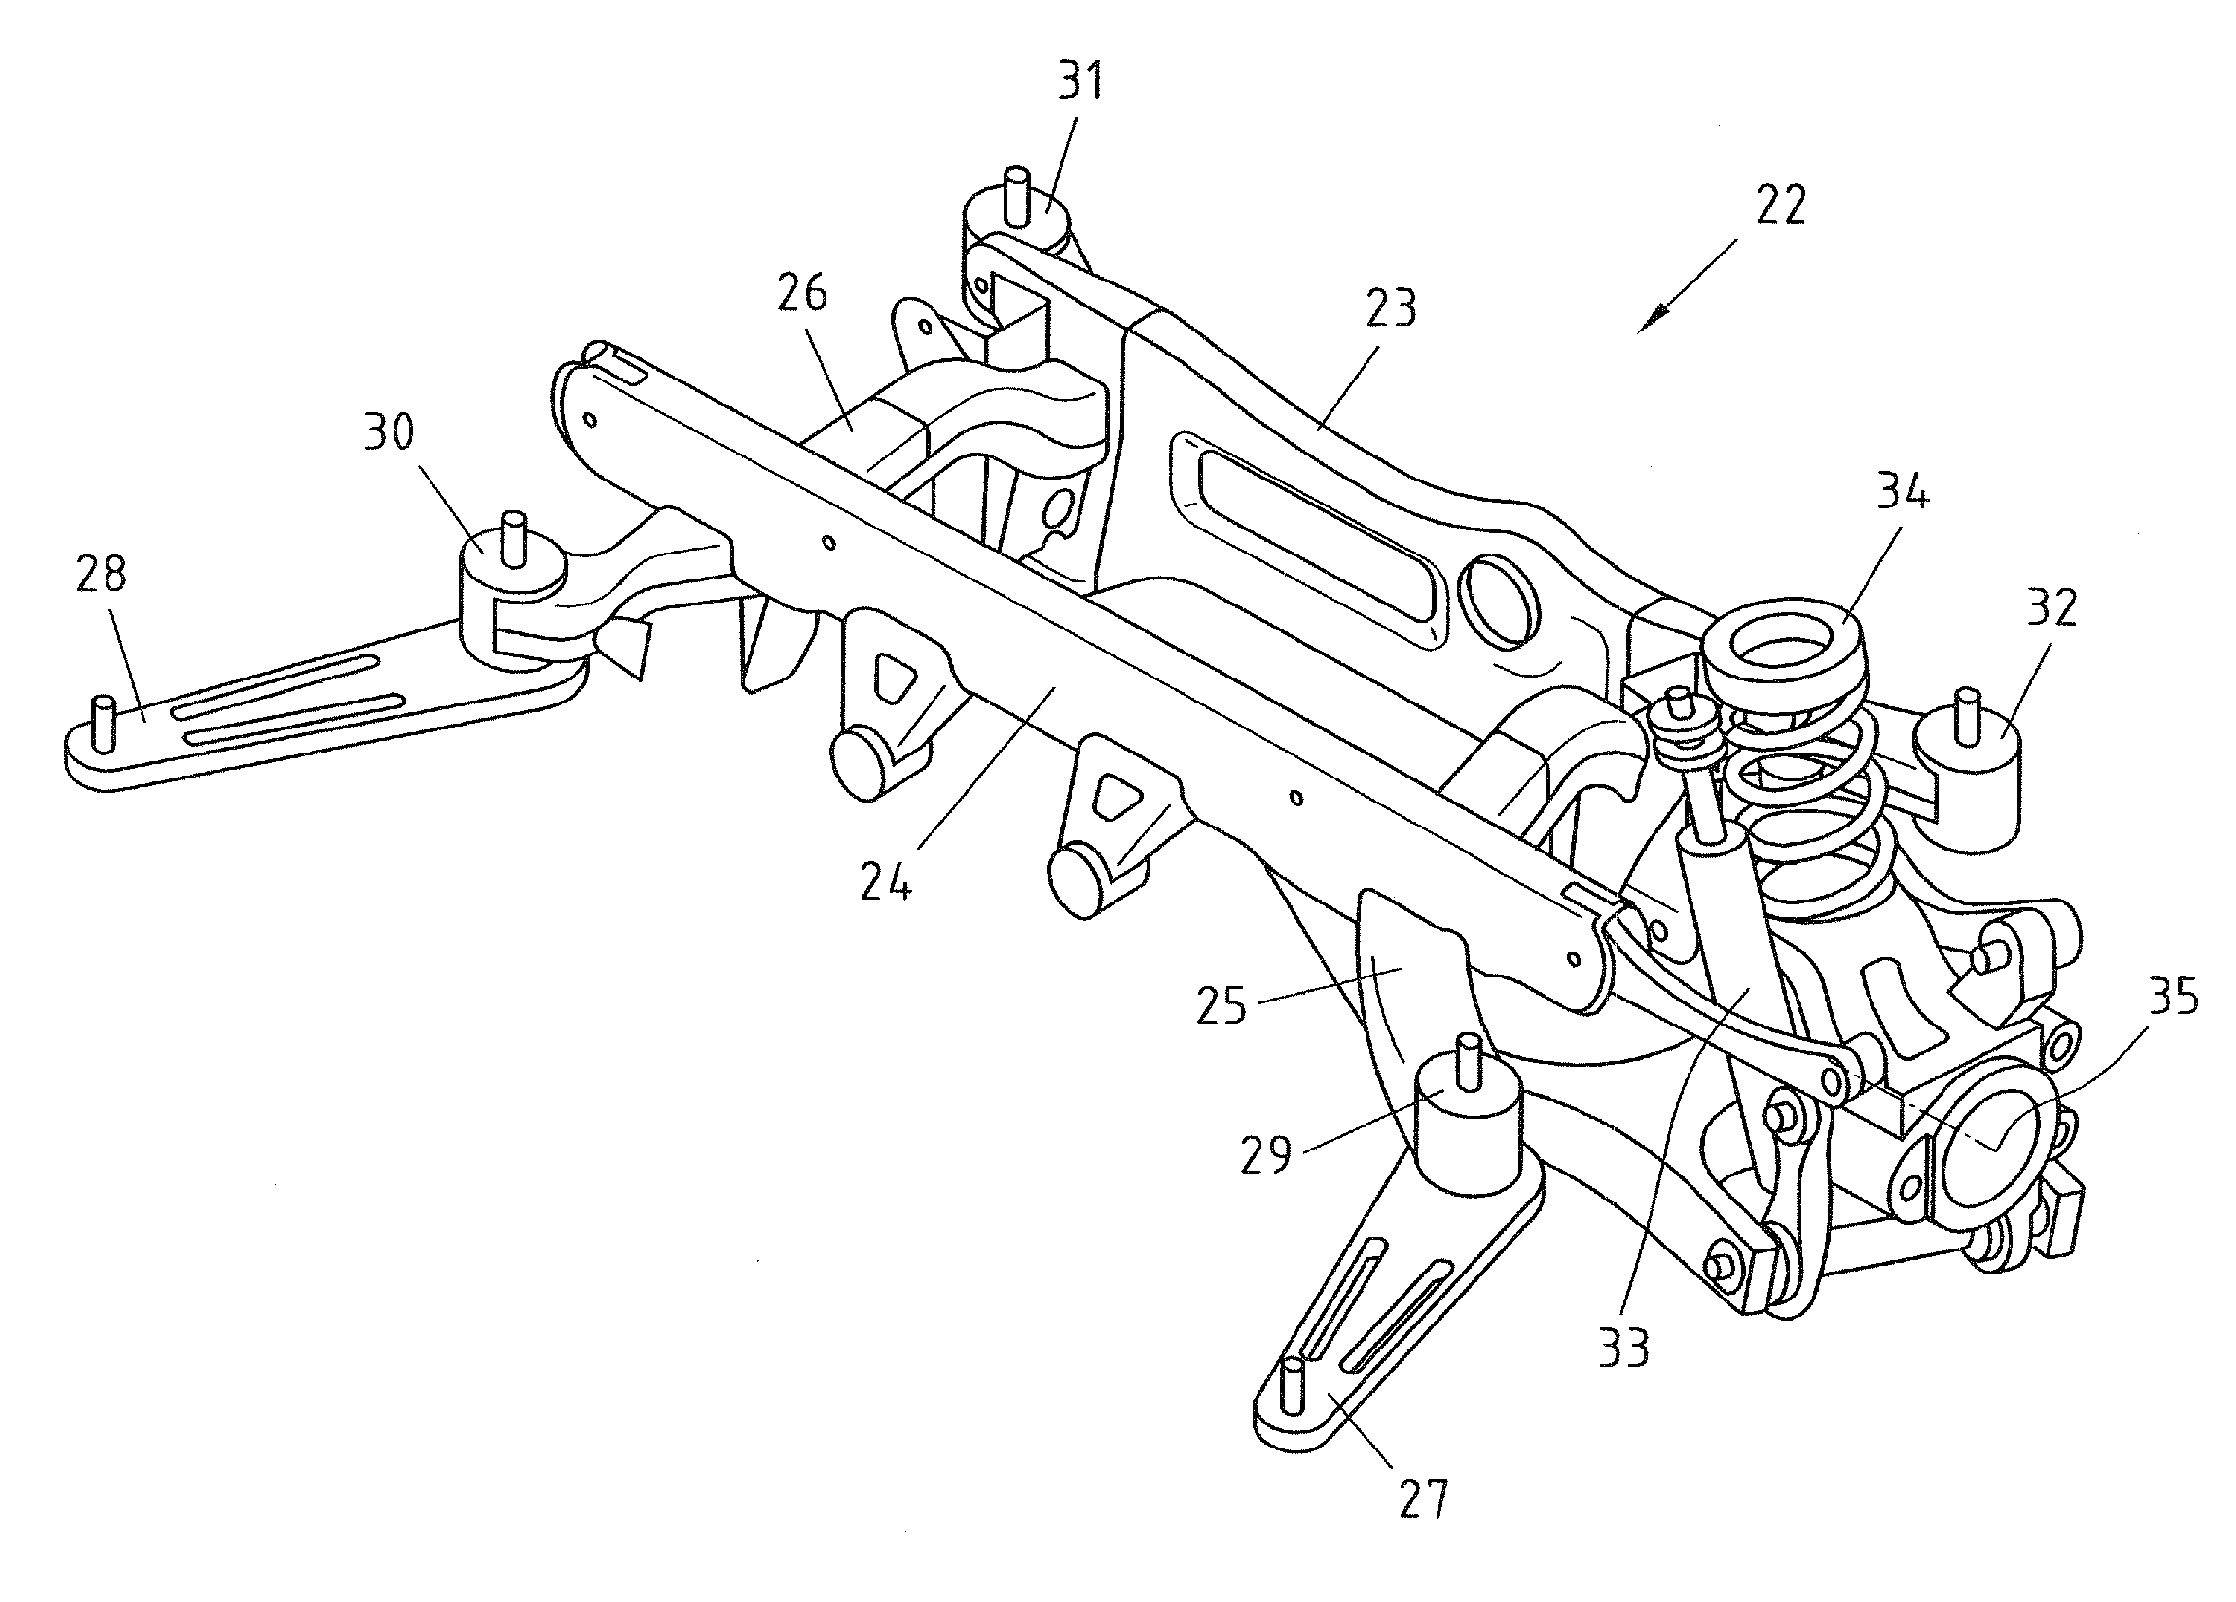 Vehicle Chassis having Modular Rear Axle Construction